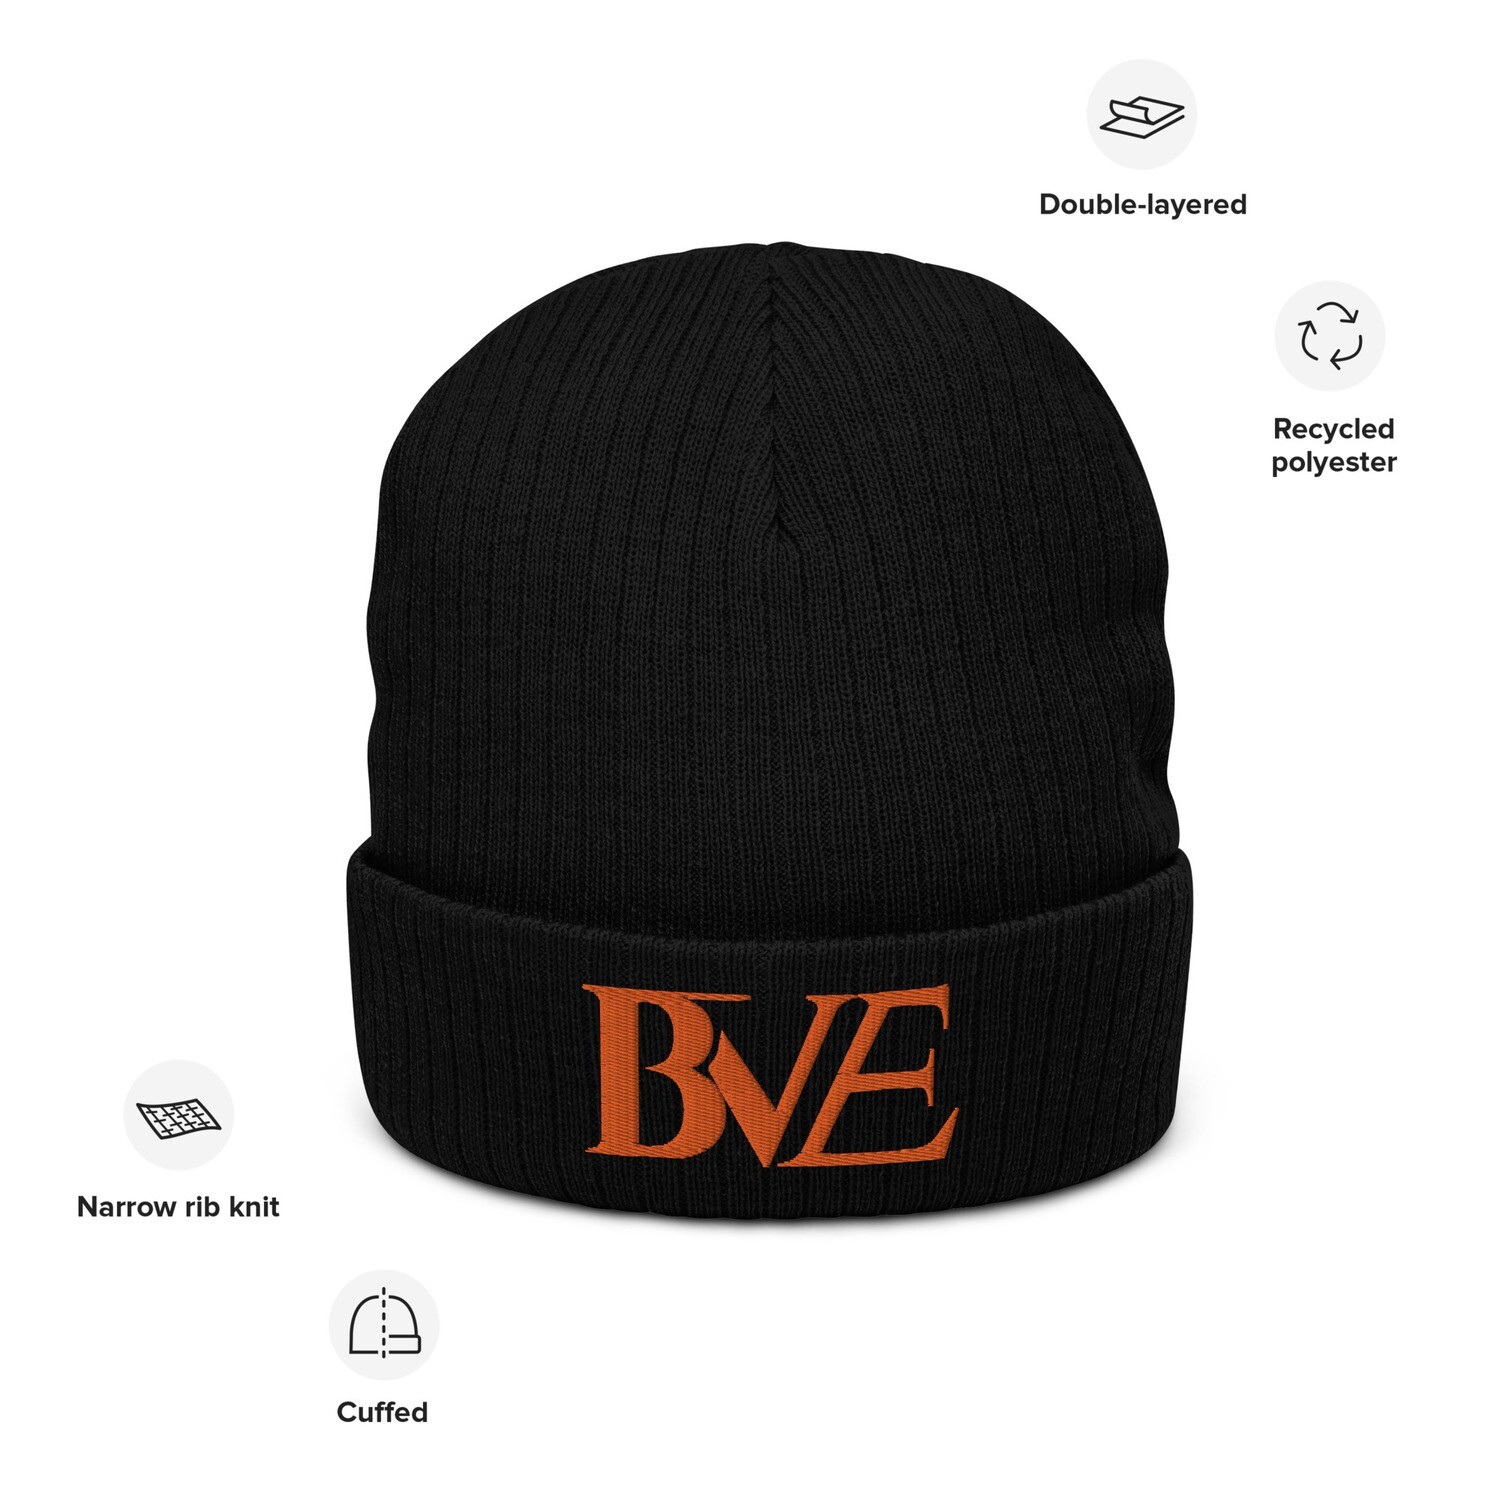 Ribbed 50% recycled BVE knit beanie